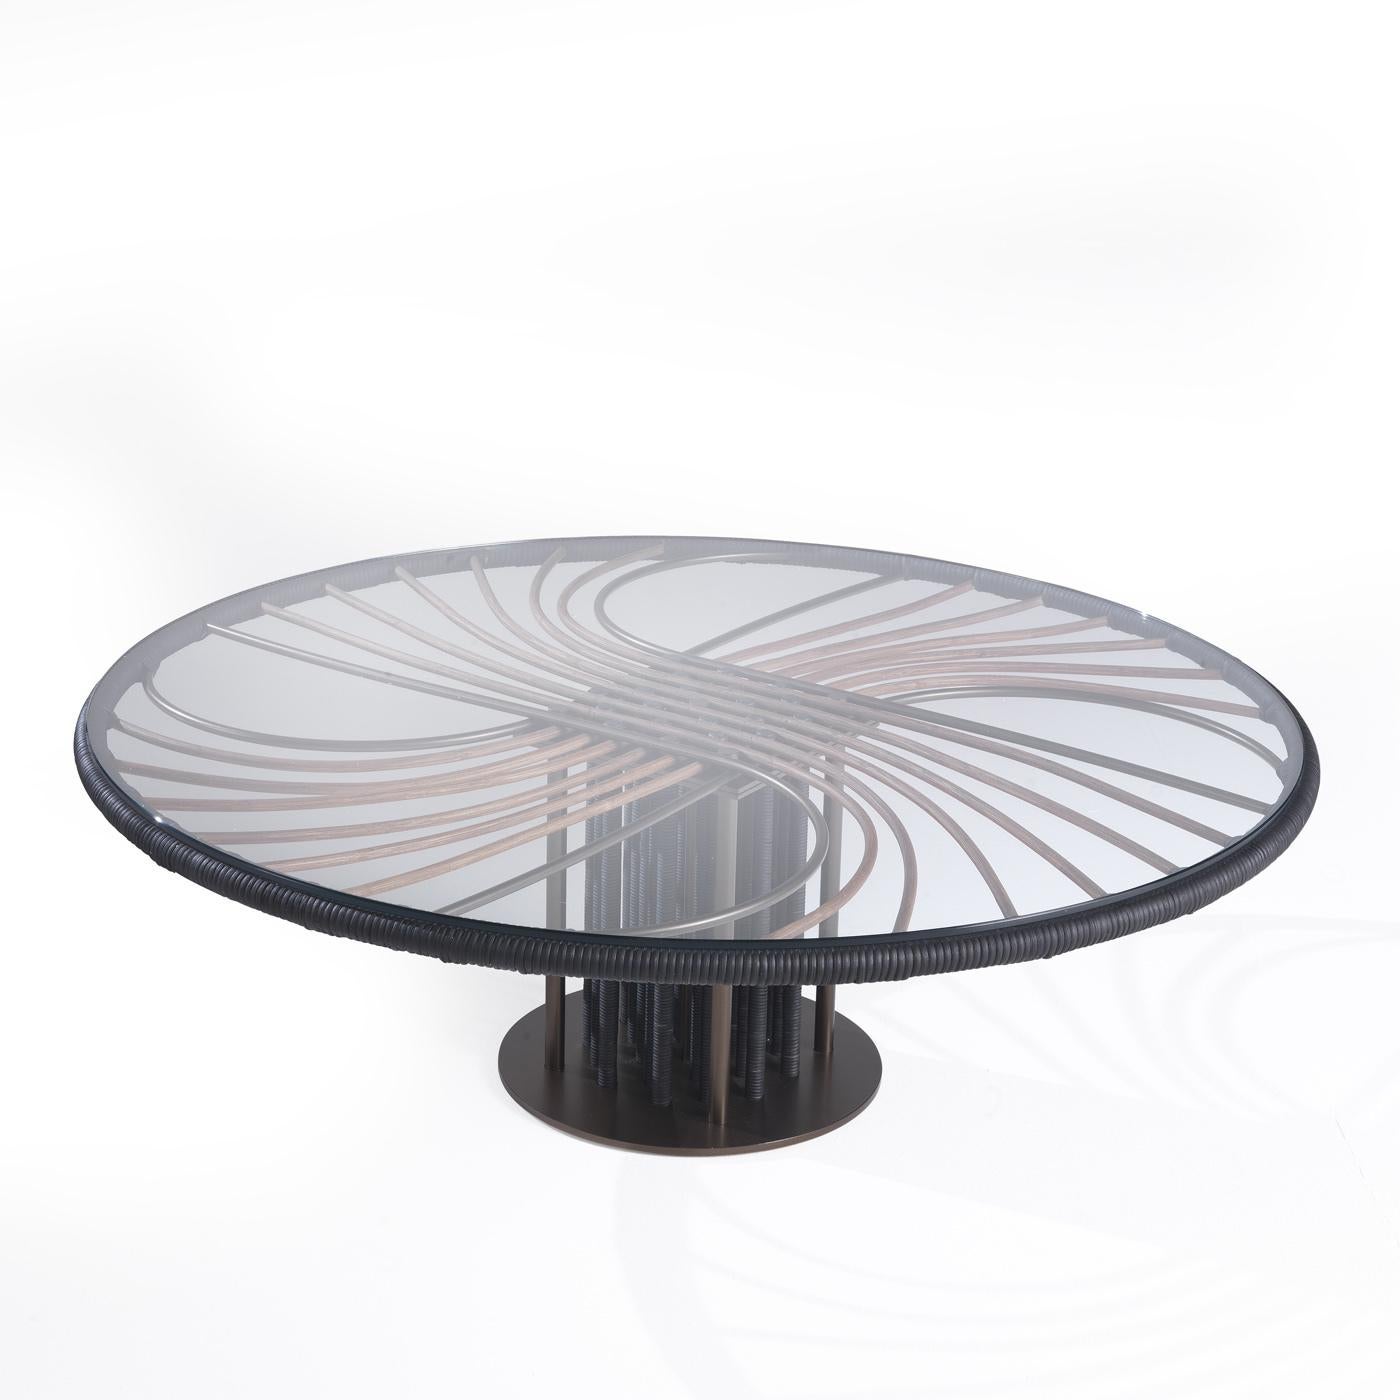 A superb example of impeccable craftsmanship, this coffee table will elevate any residential or office decor with refined sophistication. Resting on a circular base, the central support is composed of bronzed metal legs in different hues that hold a